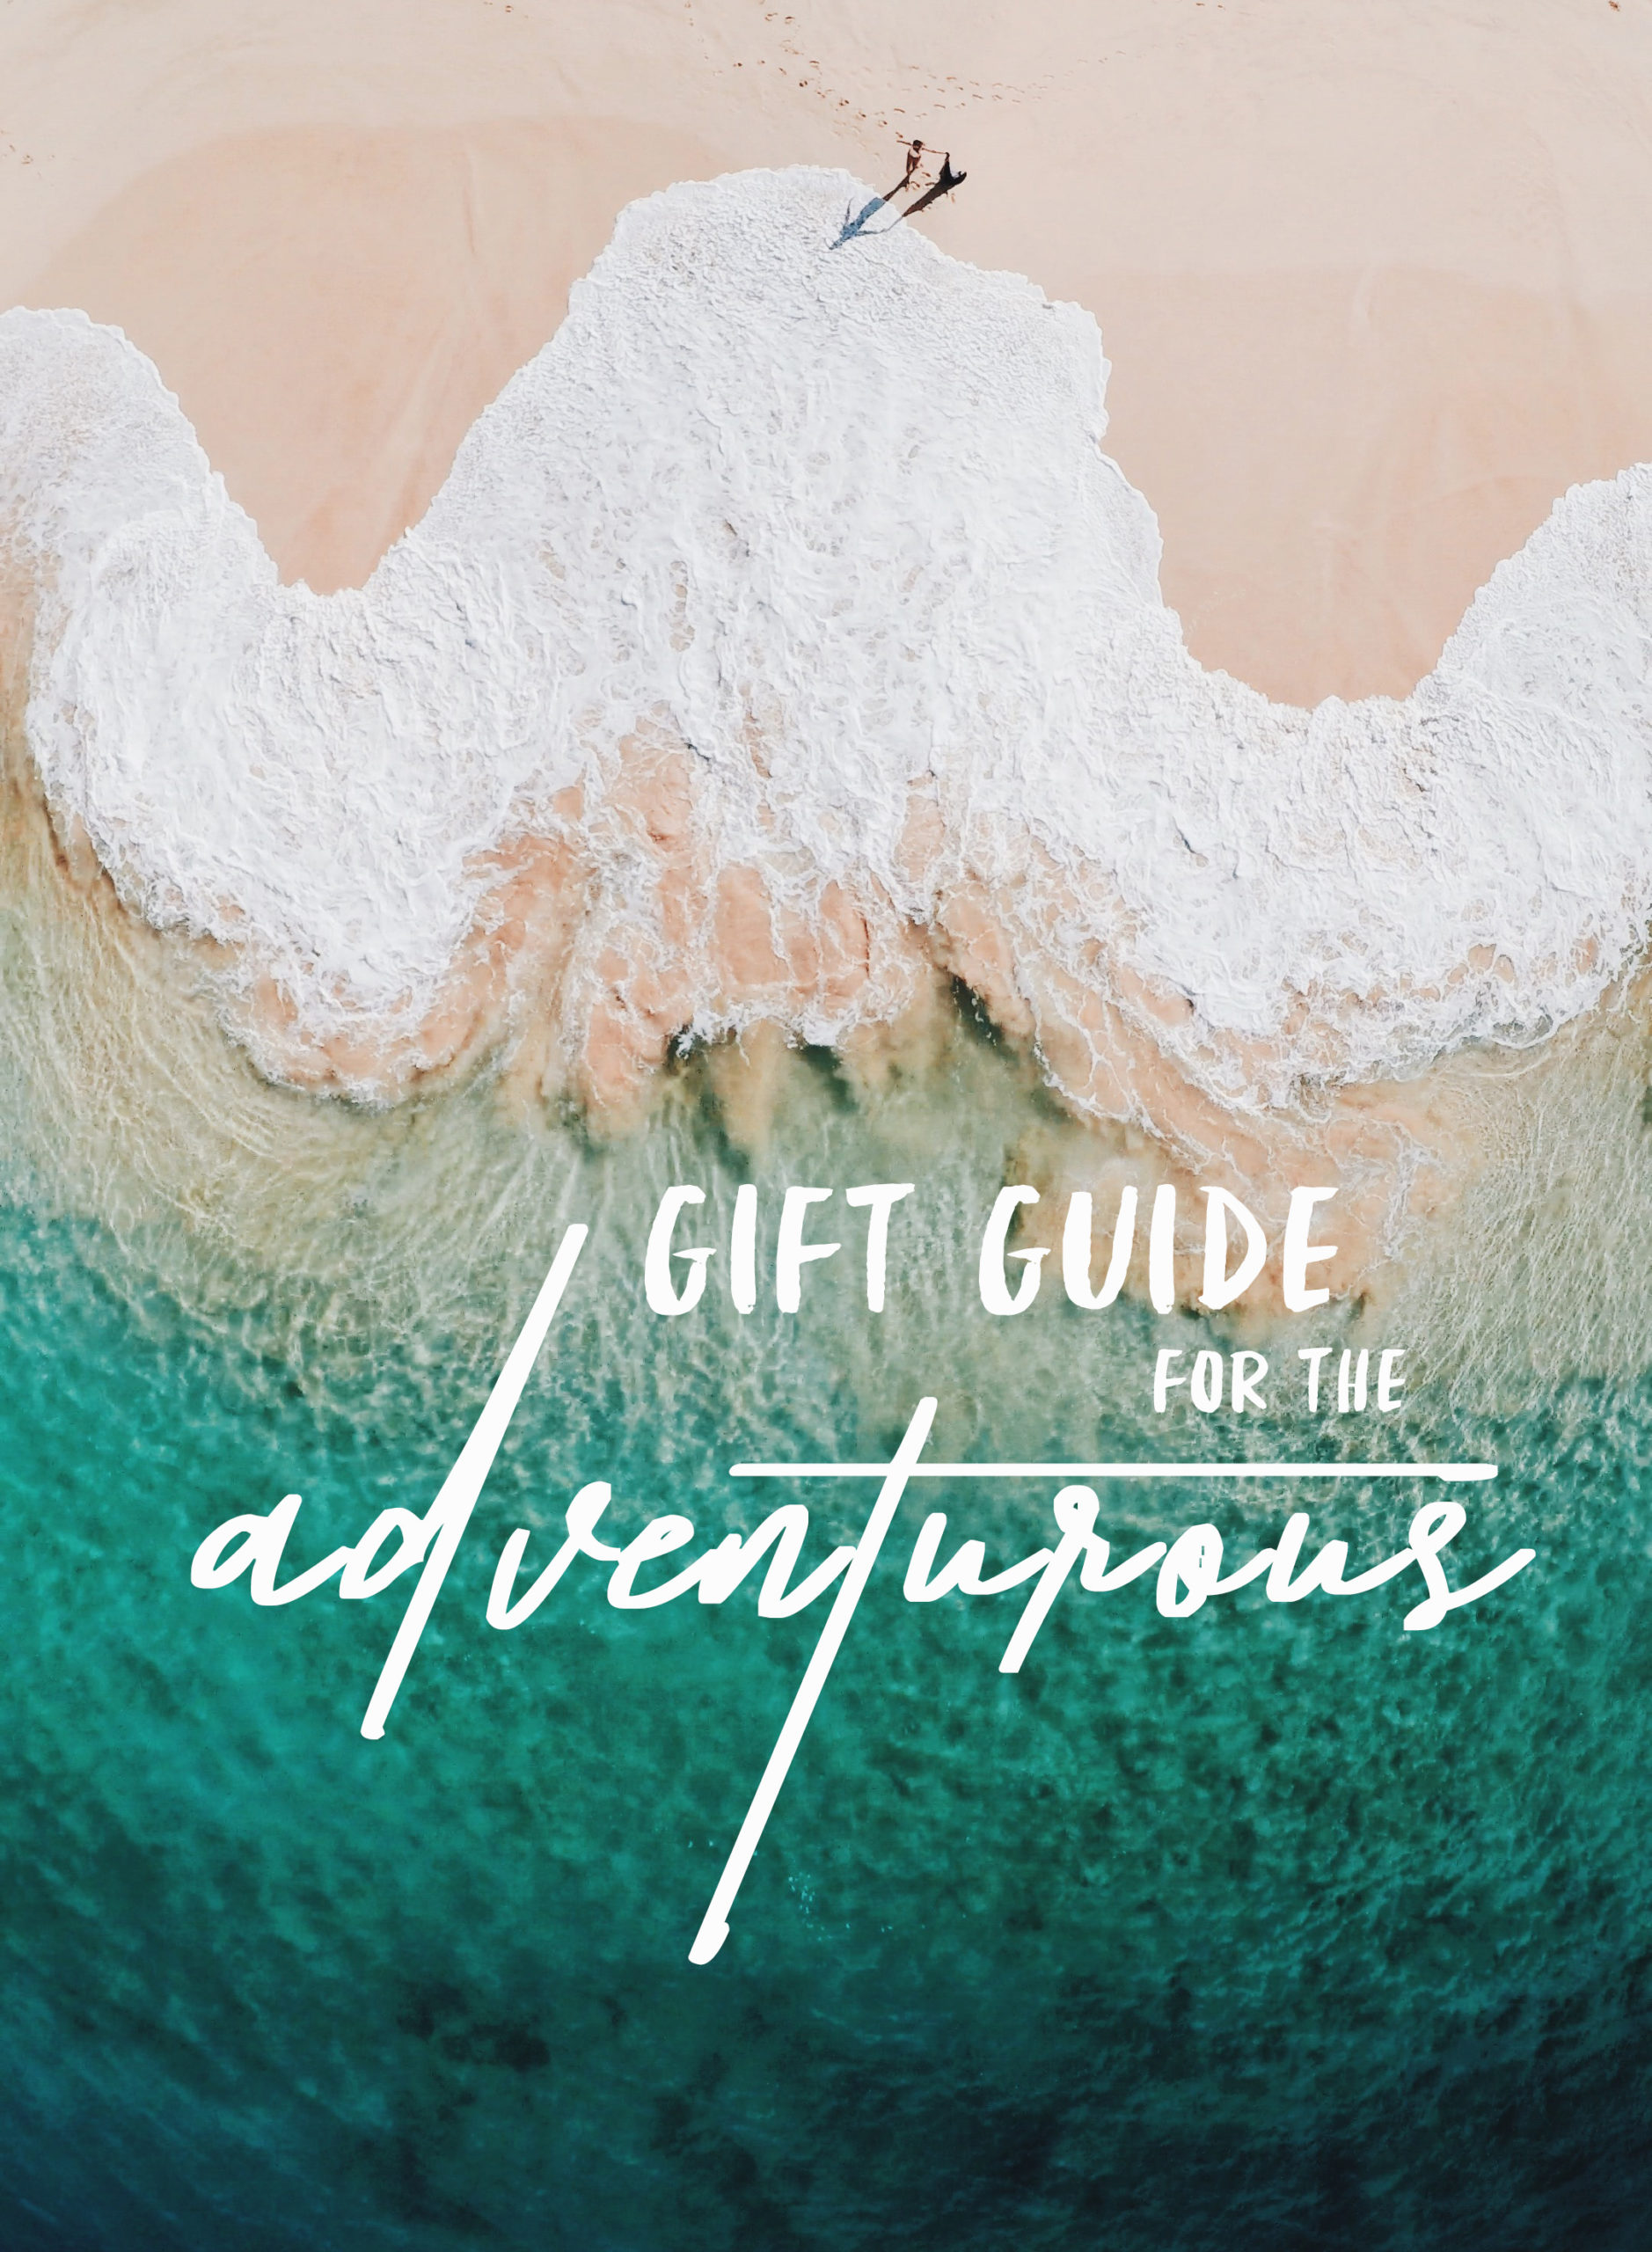 Gift Guide for the Adventurous | Gift Guide for the Adventurers | Gift Guide for Travel Lovers | Gift Guide for Men | Gift Guide for Women | Gift Guide for Your Boyfriend | Gift Guide for Your Girlfriend | Trendy Gift Guide | Ideas for Christmas Gifts